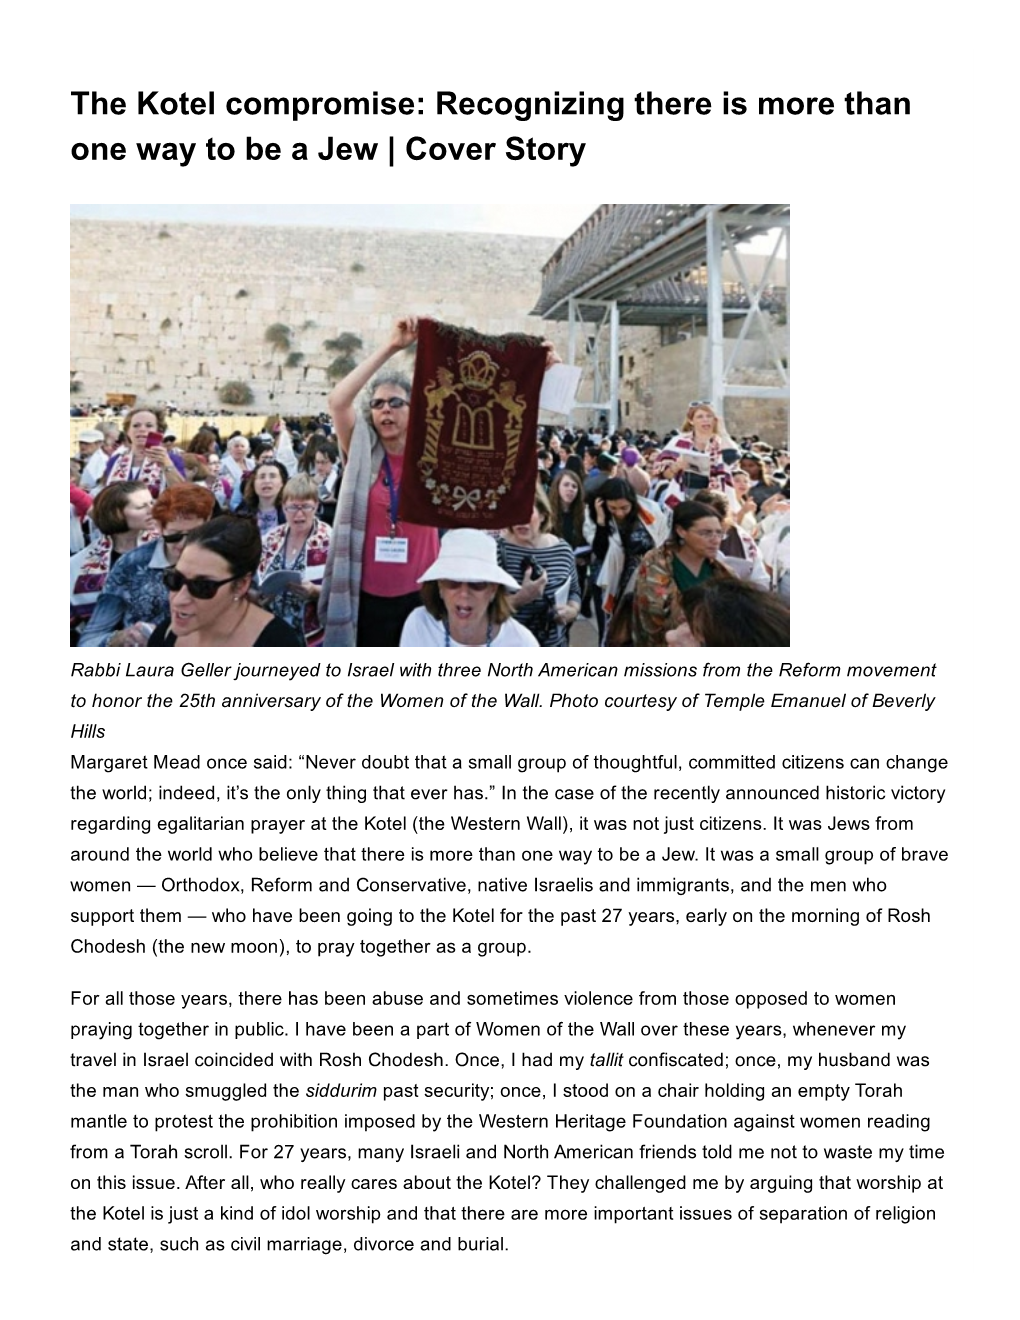 The Kotel Compromise: Recognizing There Is More Than One Way to Be a Jew | Cover Story